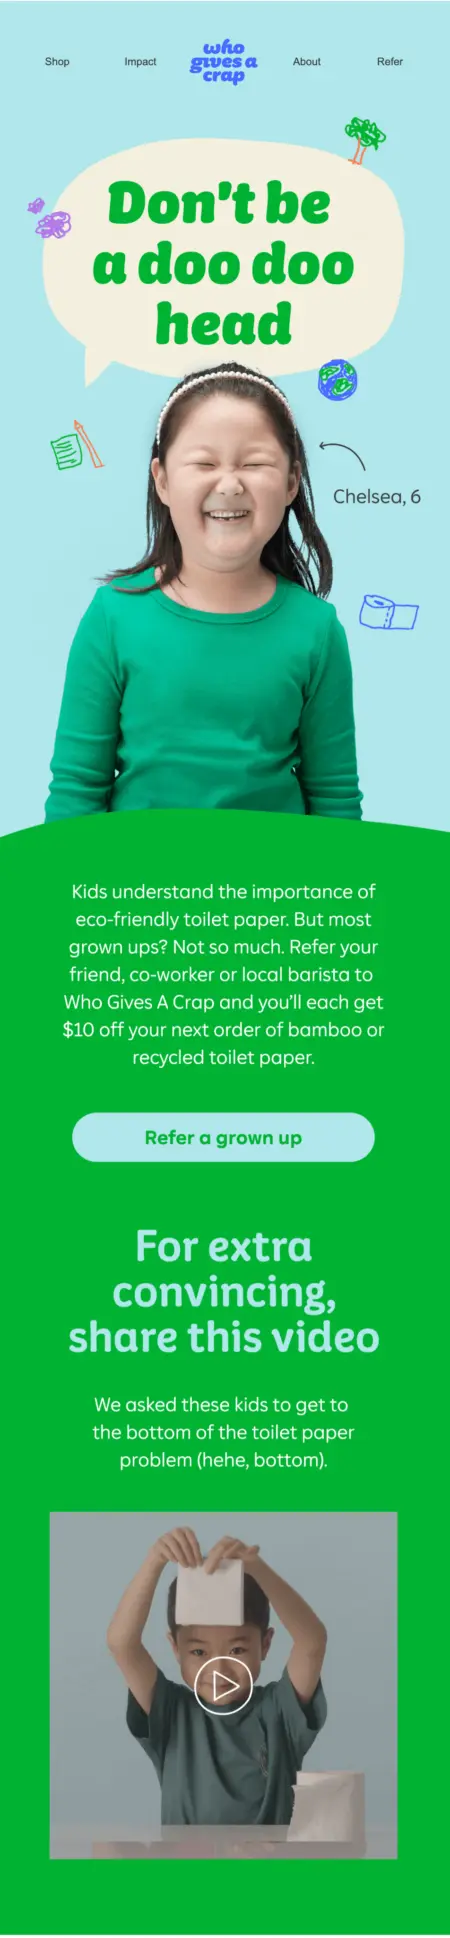 Image shows a referral incentive email from Who Gives A Crap, with a silly headline “Don’t be a doo-doo head,” and showing pictures of children, with the intention to create brand advocates.